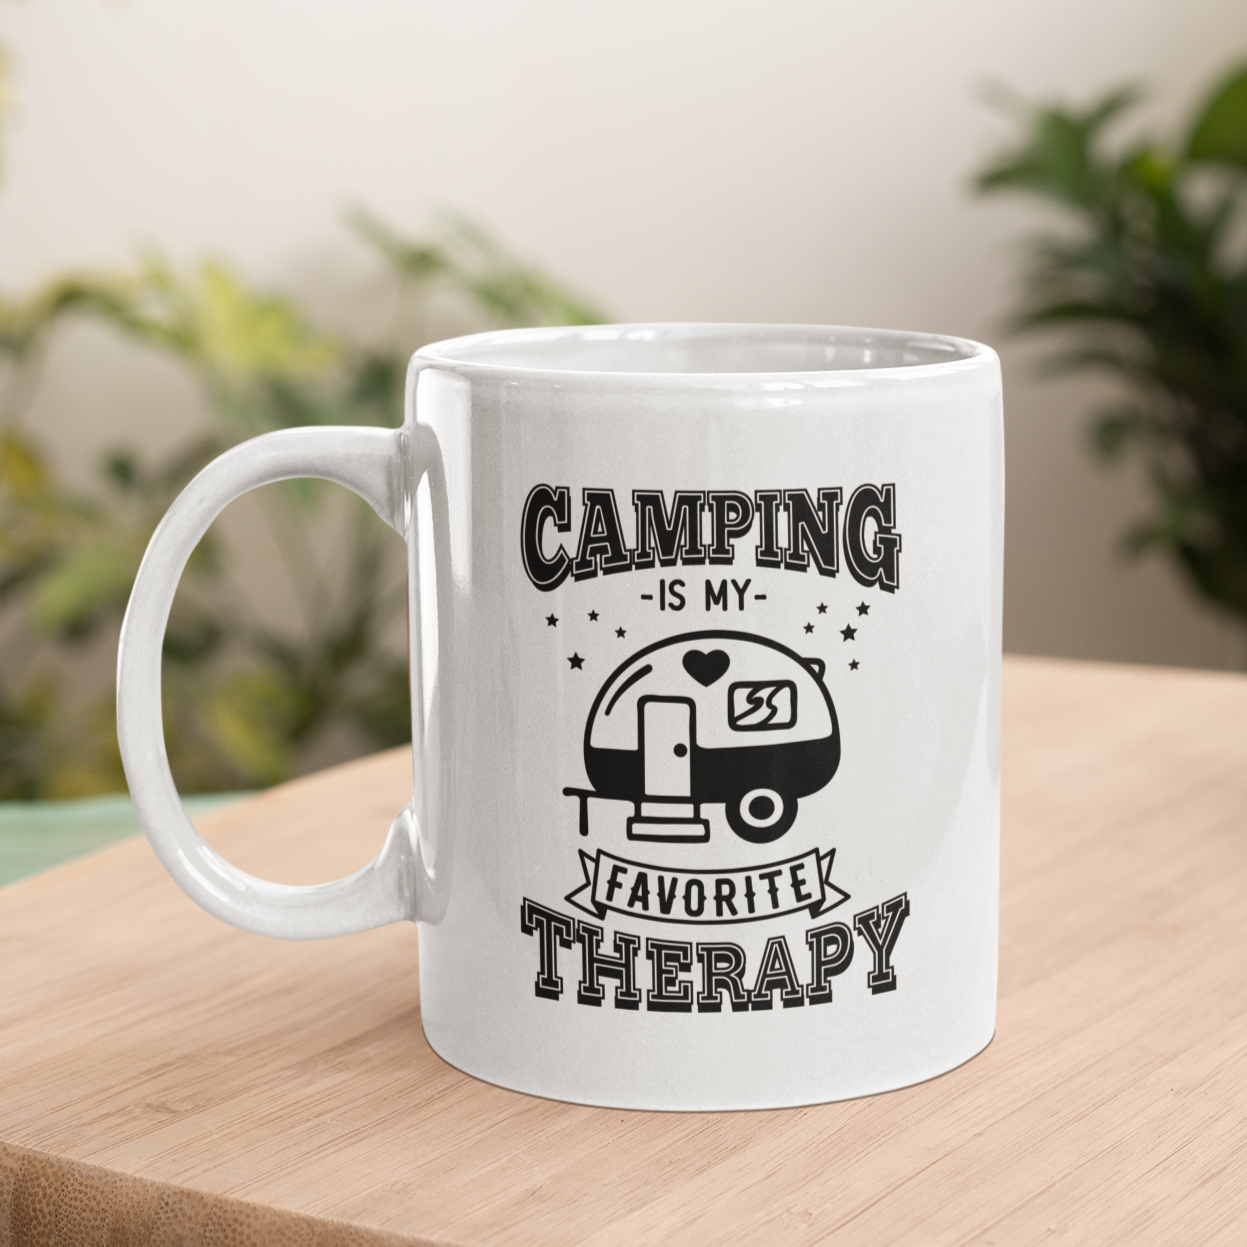 Camping Is My Favourite Therapy Mug